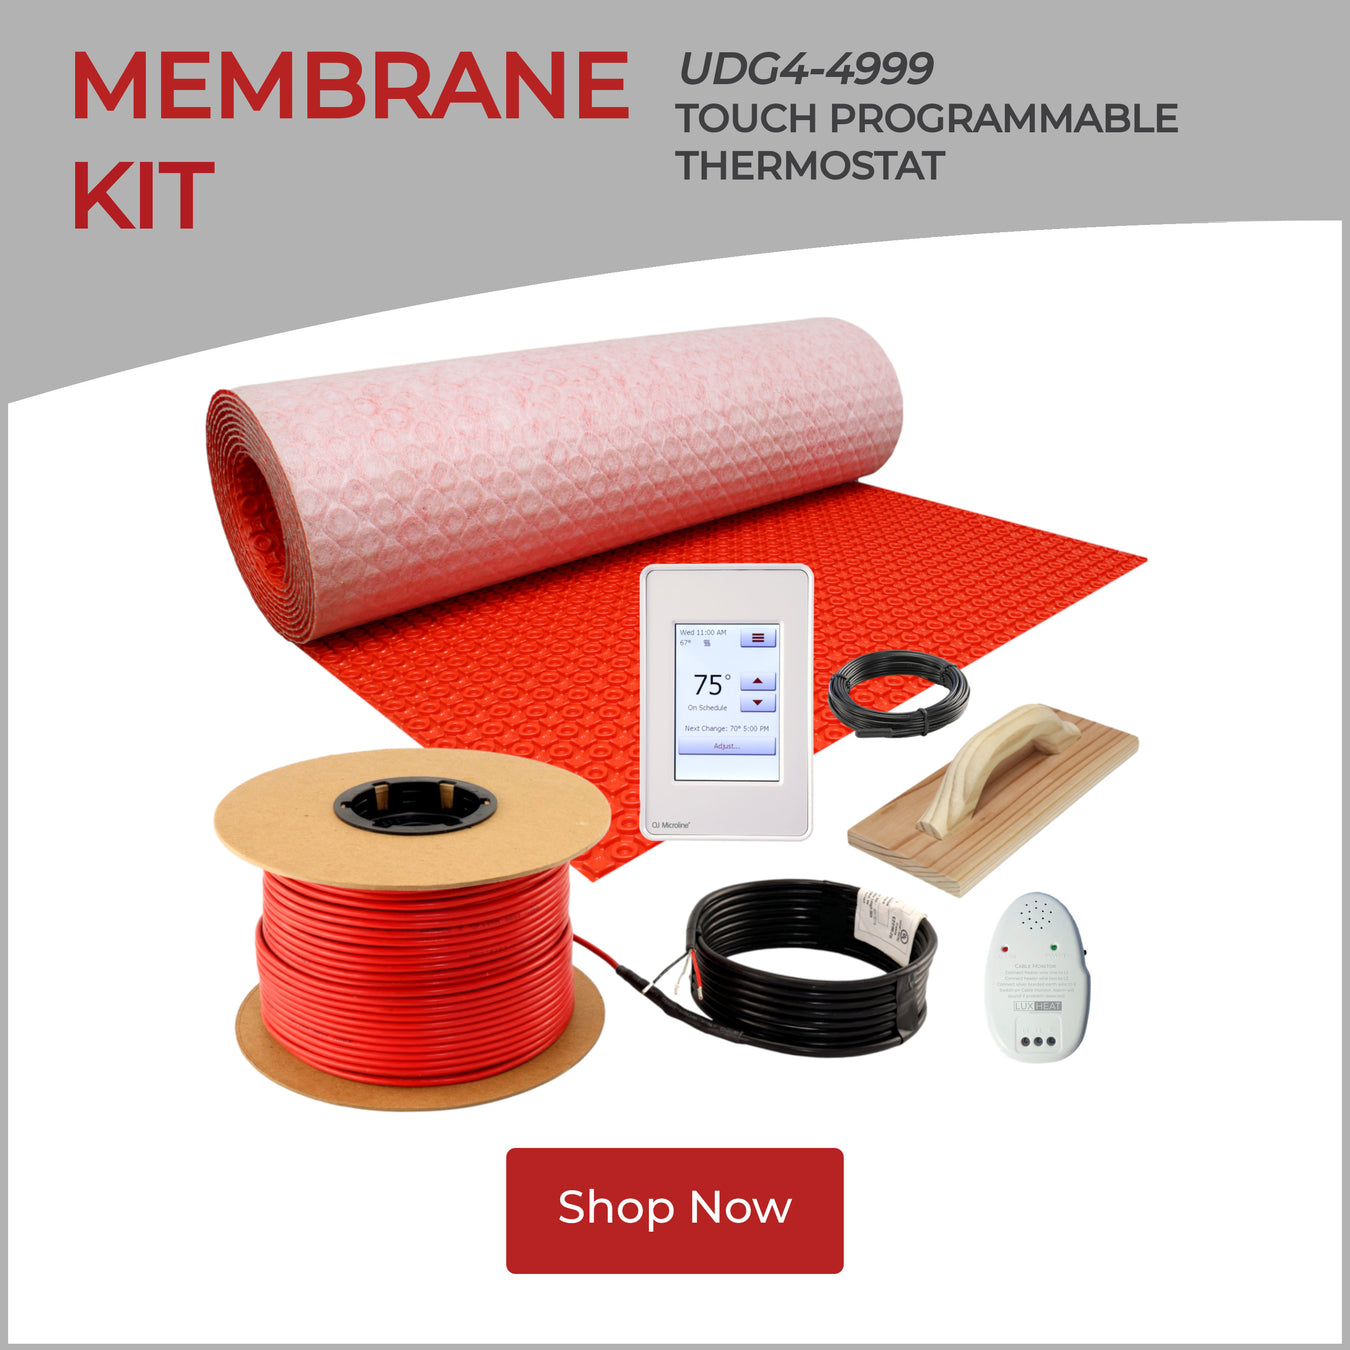 Overview_-_Membrane_Kit_with_UDG4